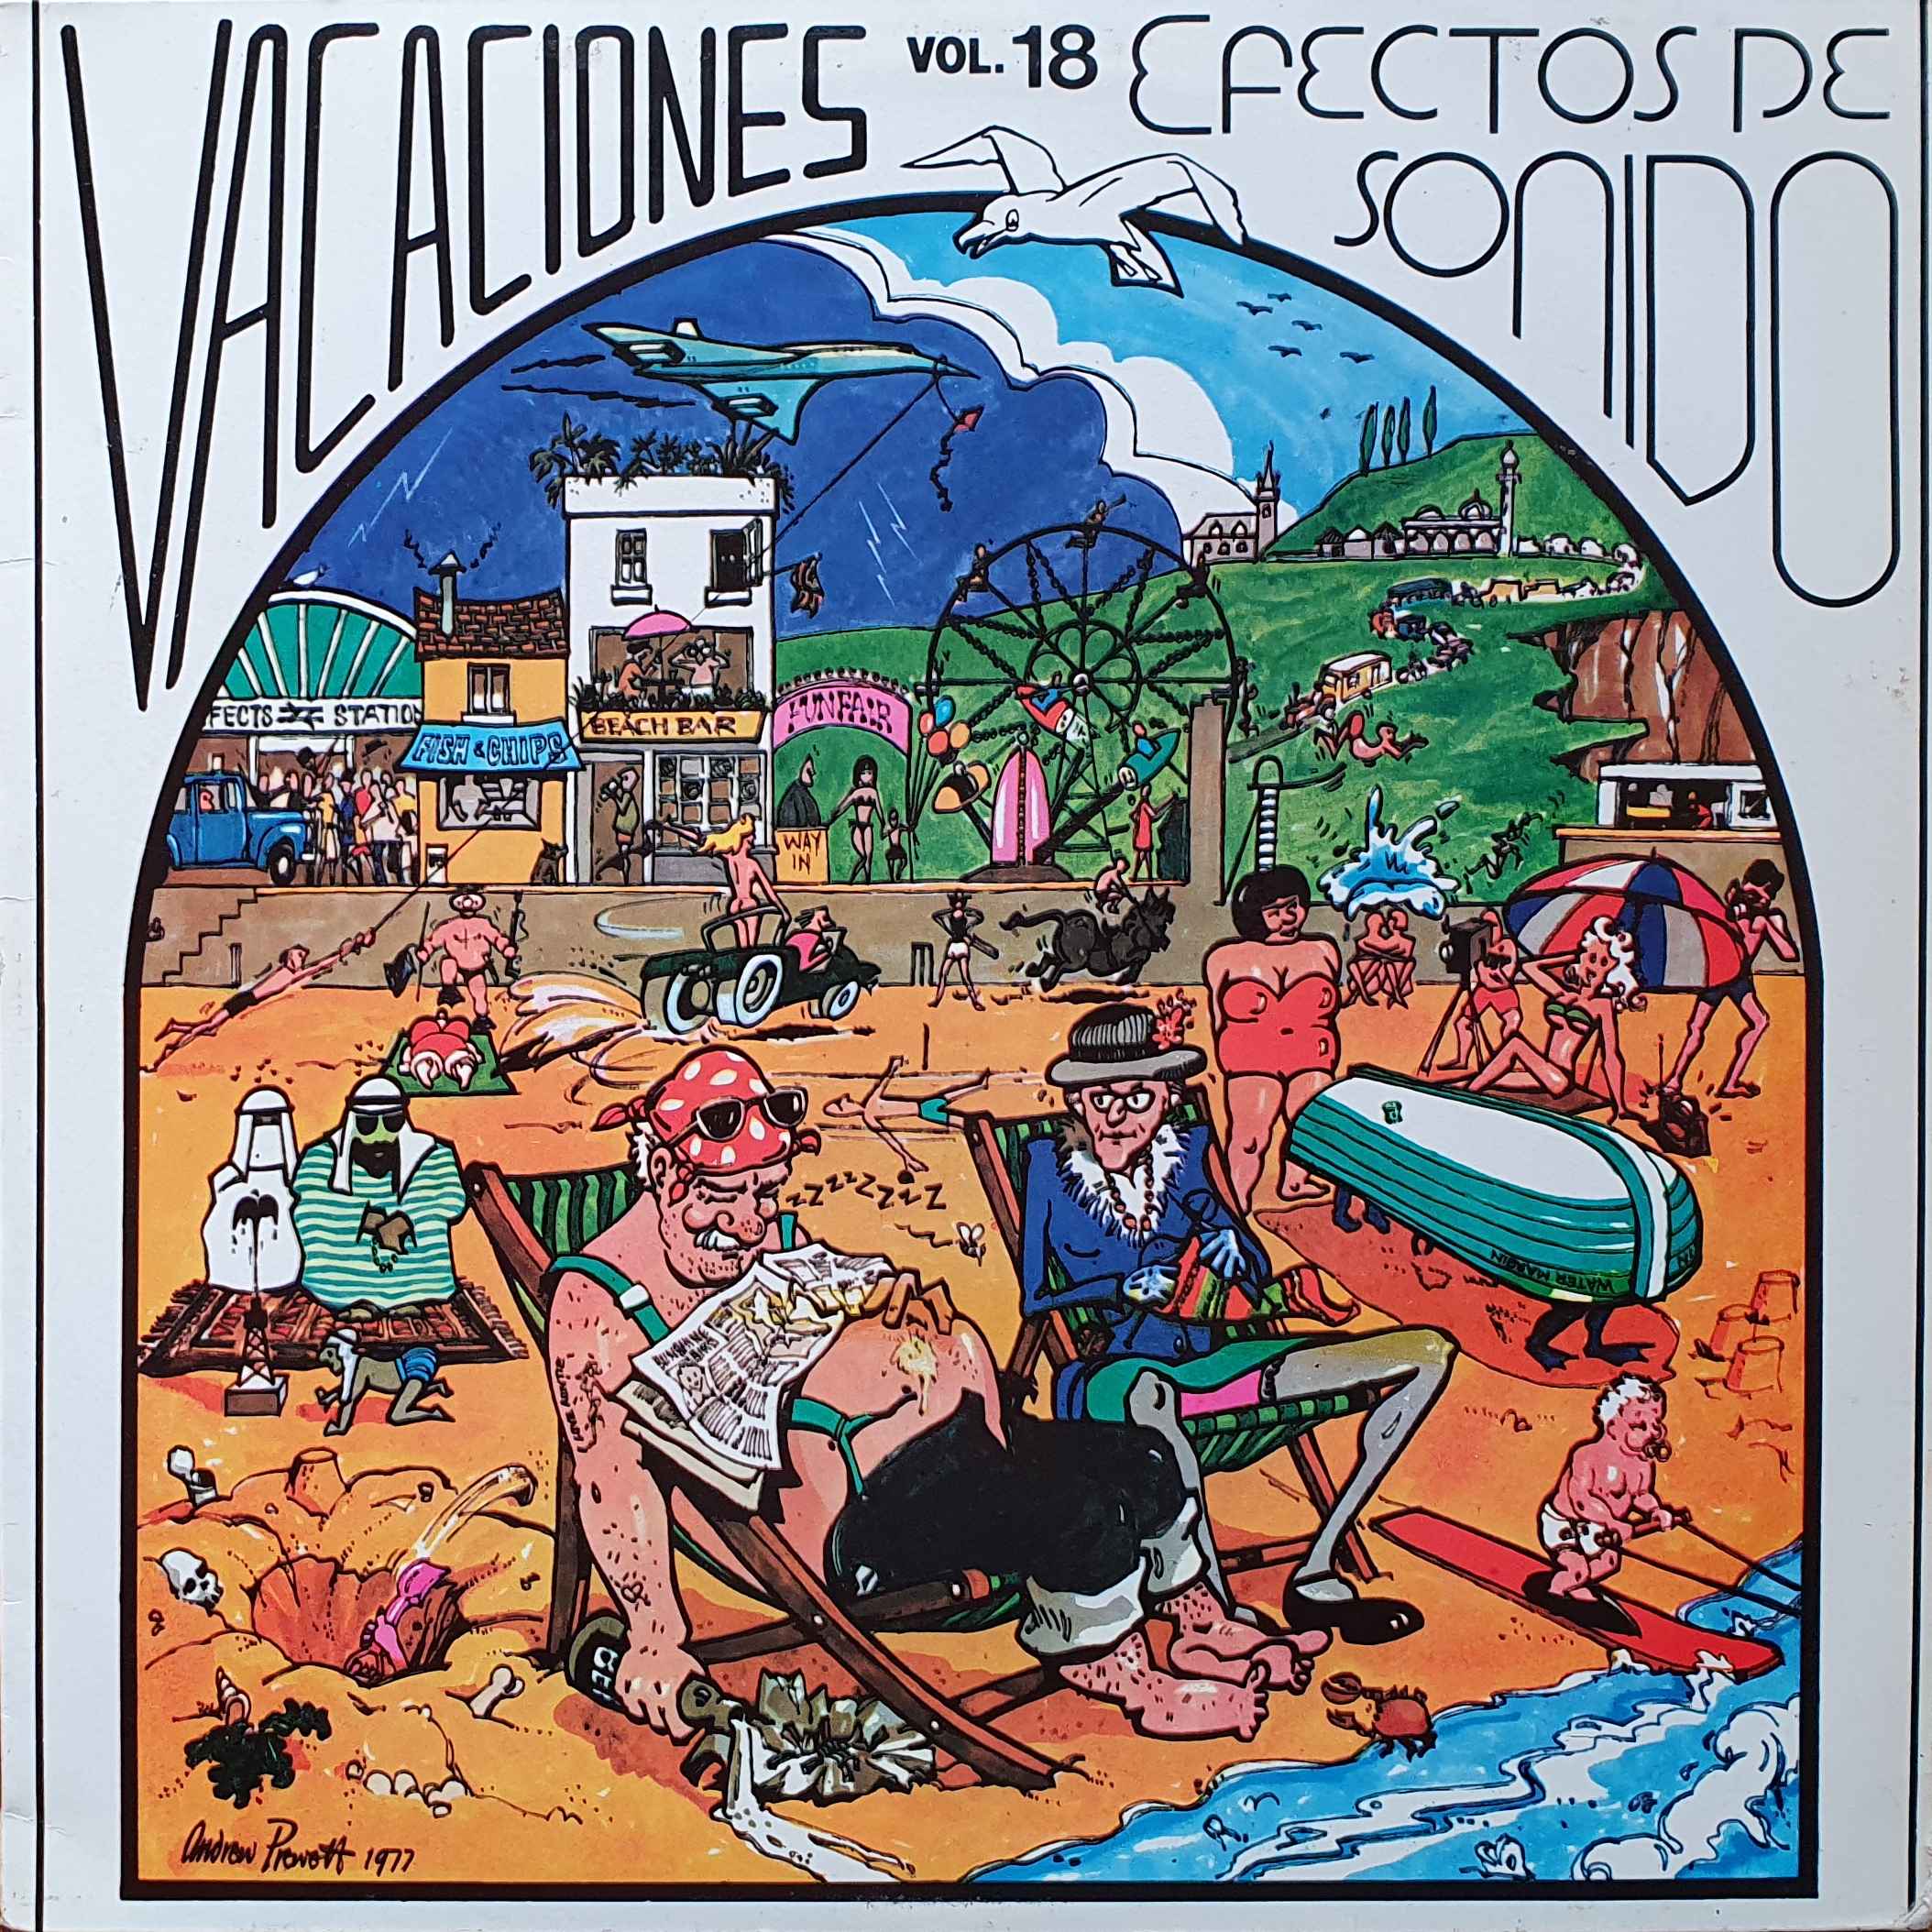 Picture of 51.0122 Efectos de sonido Vol. 18 - Vacaciones by artist Various from the BBC albums - Records and Tapes library